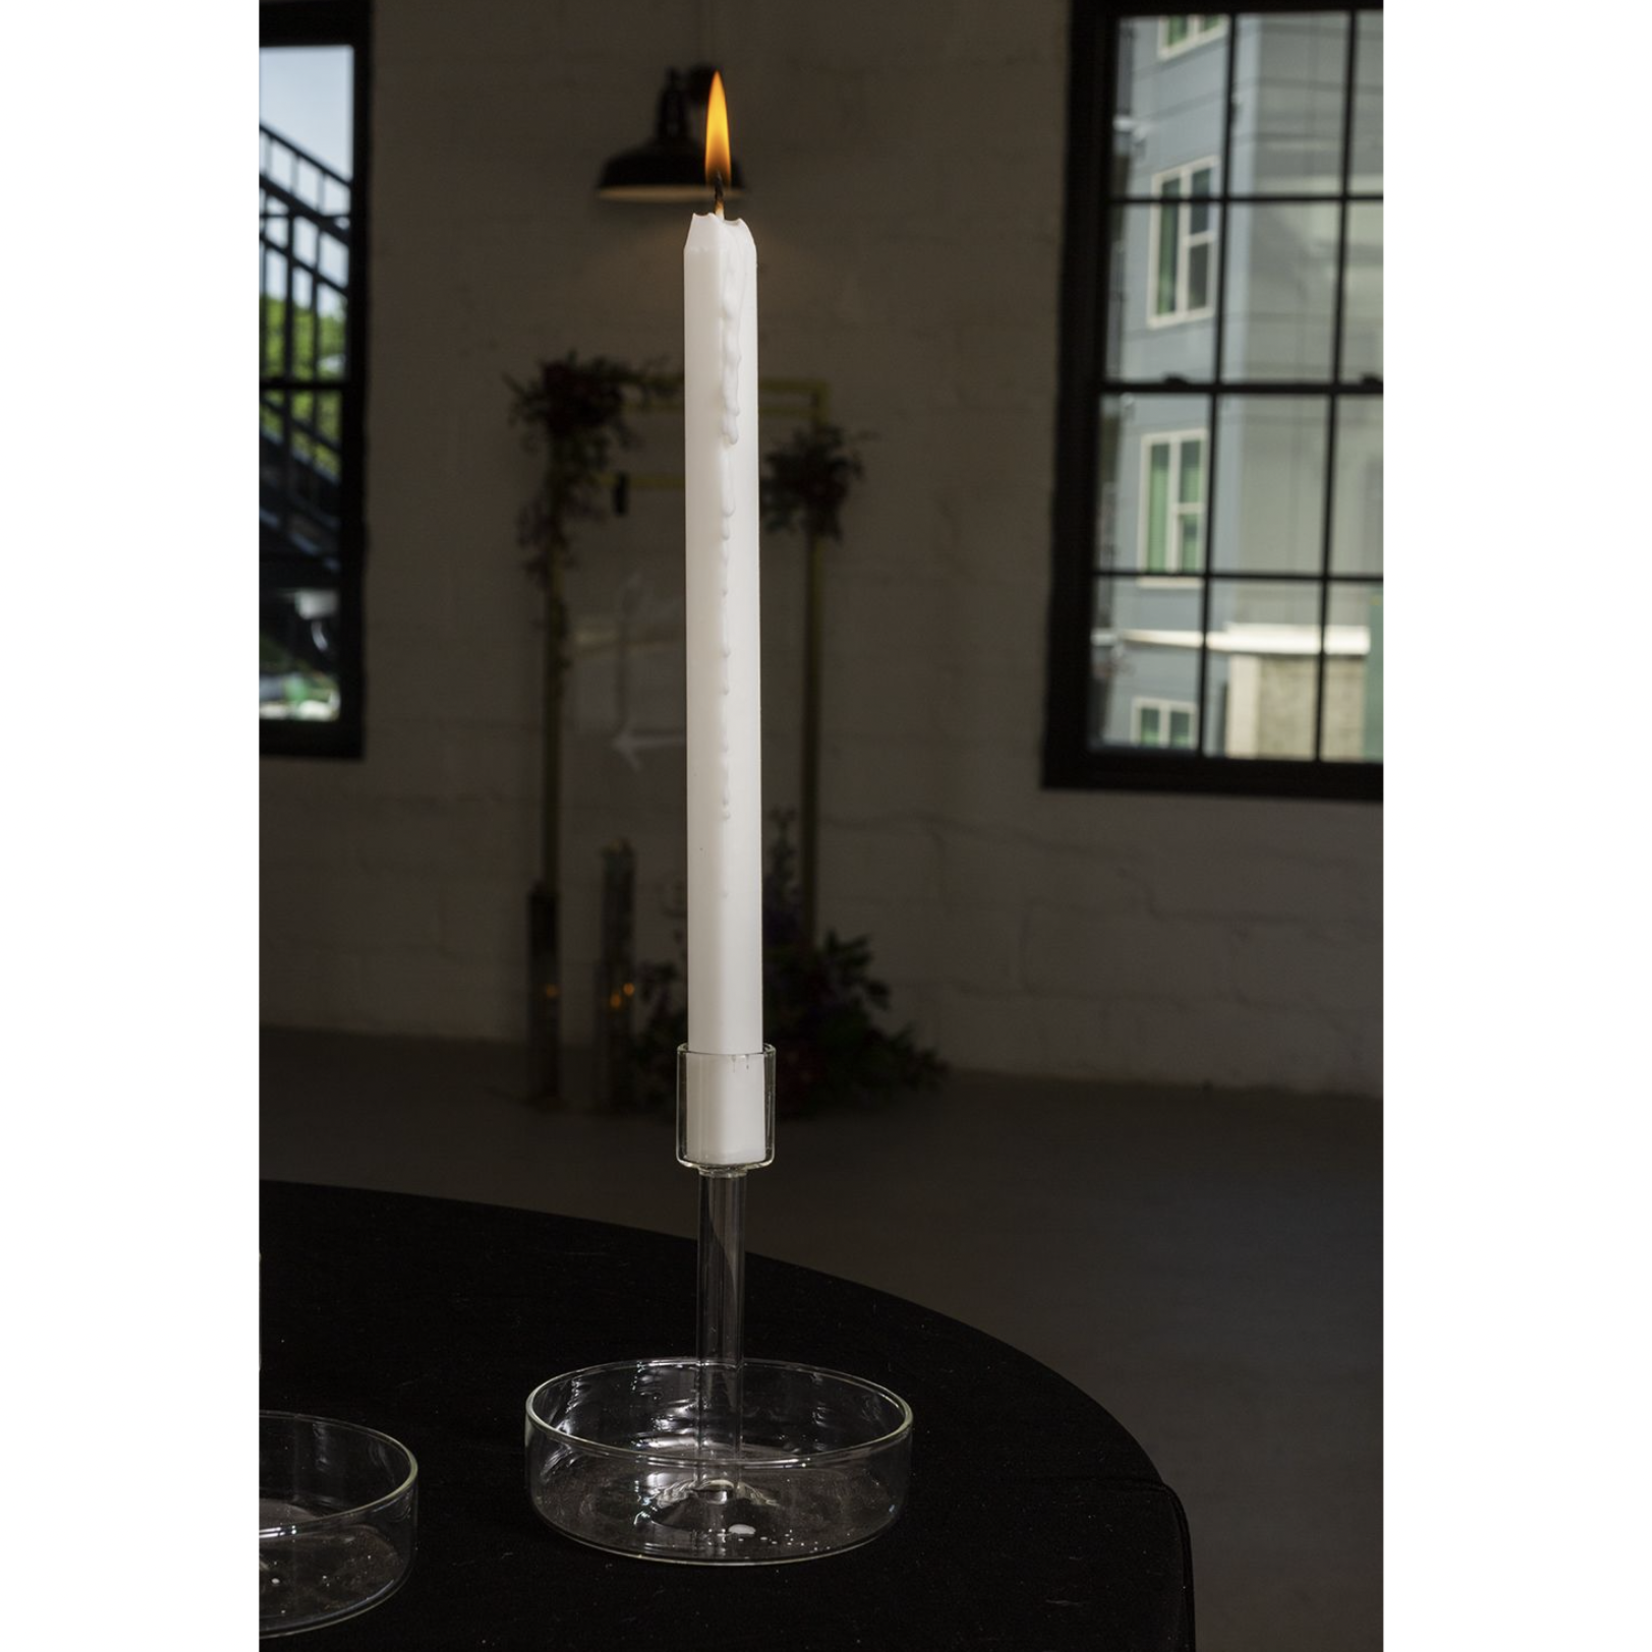 5”H X 4.25” GLASS ADELINE CANDLEHOLDER (CHIMNEY NOT INCLUDED)